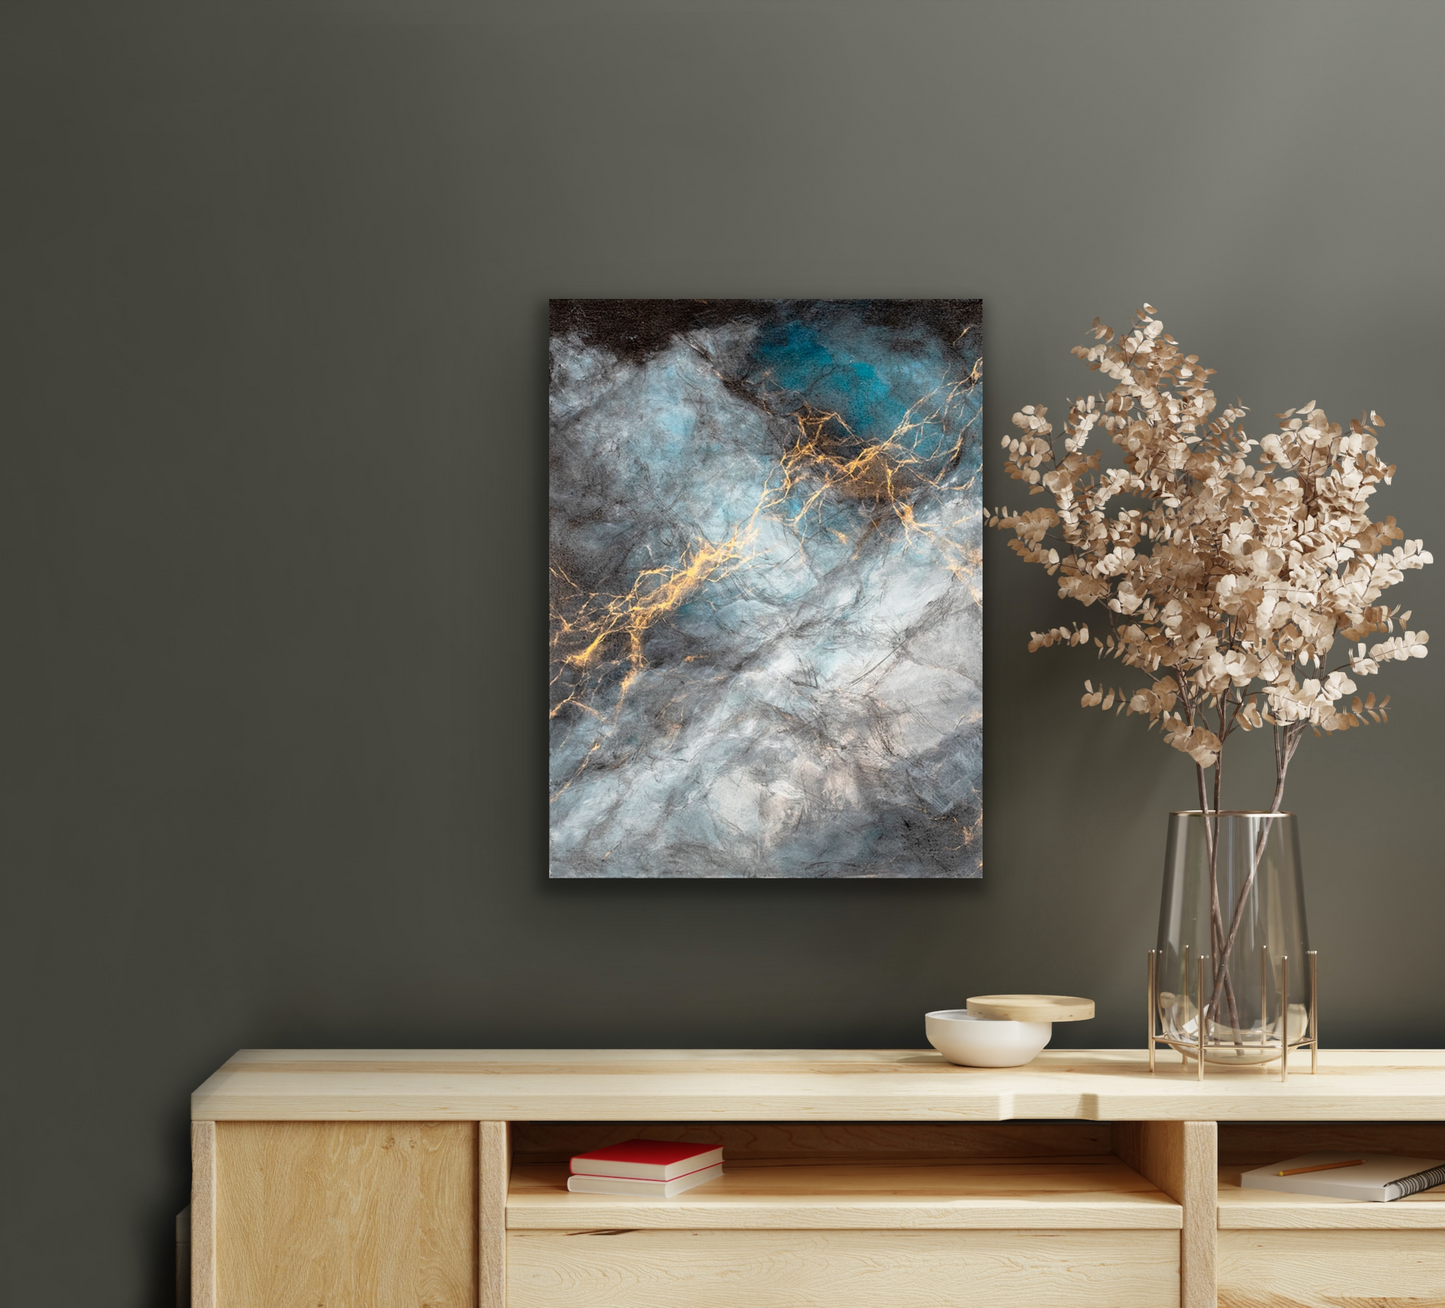 This stunning abstract painting will compliment many room of your home.